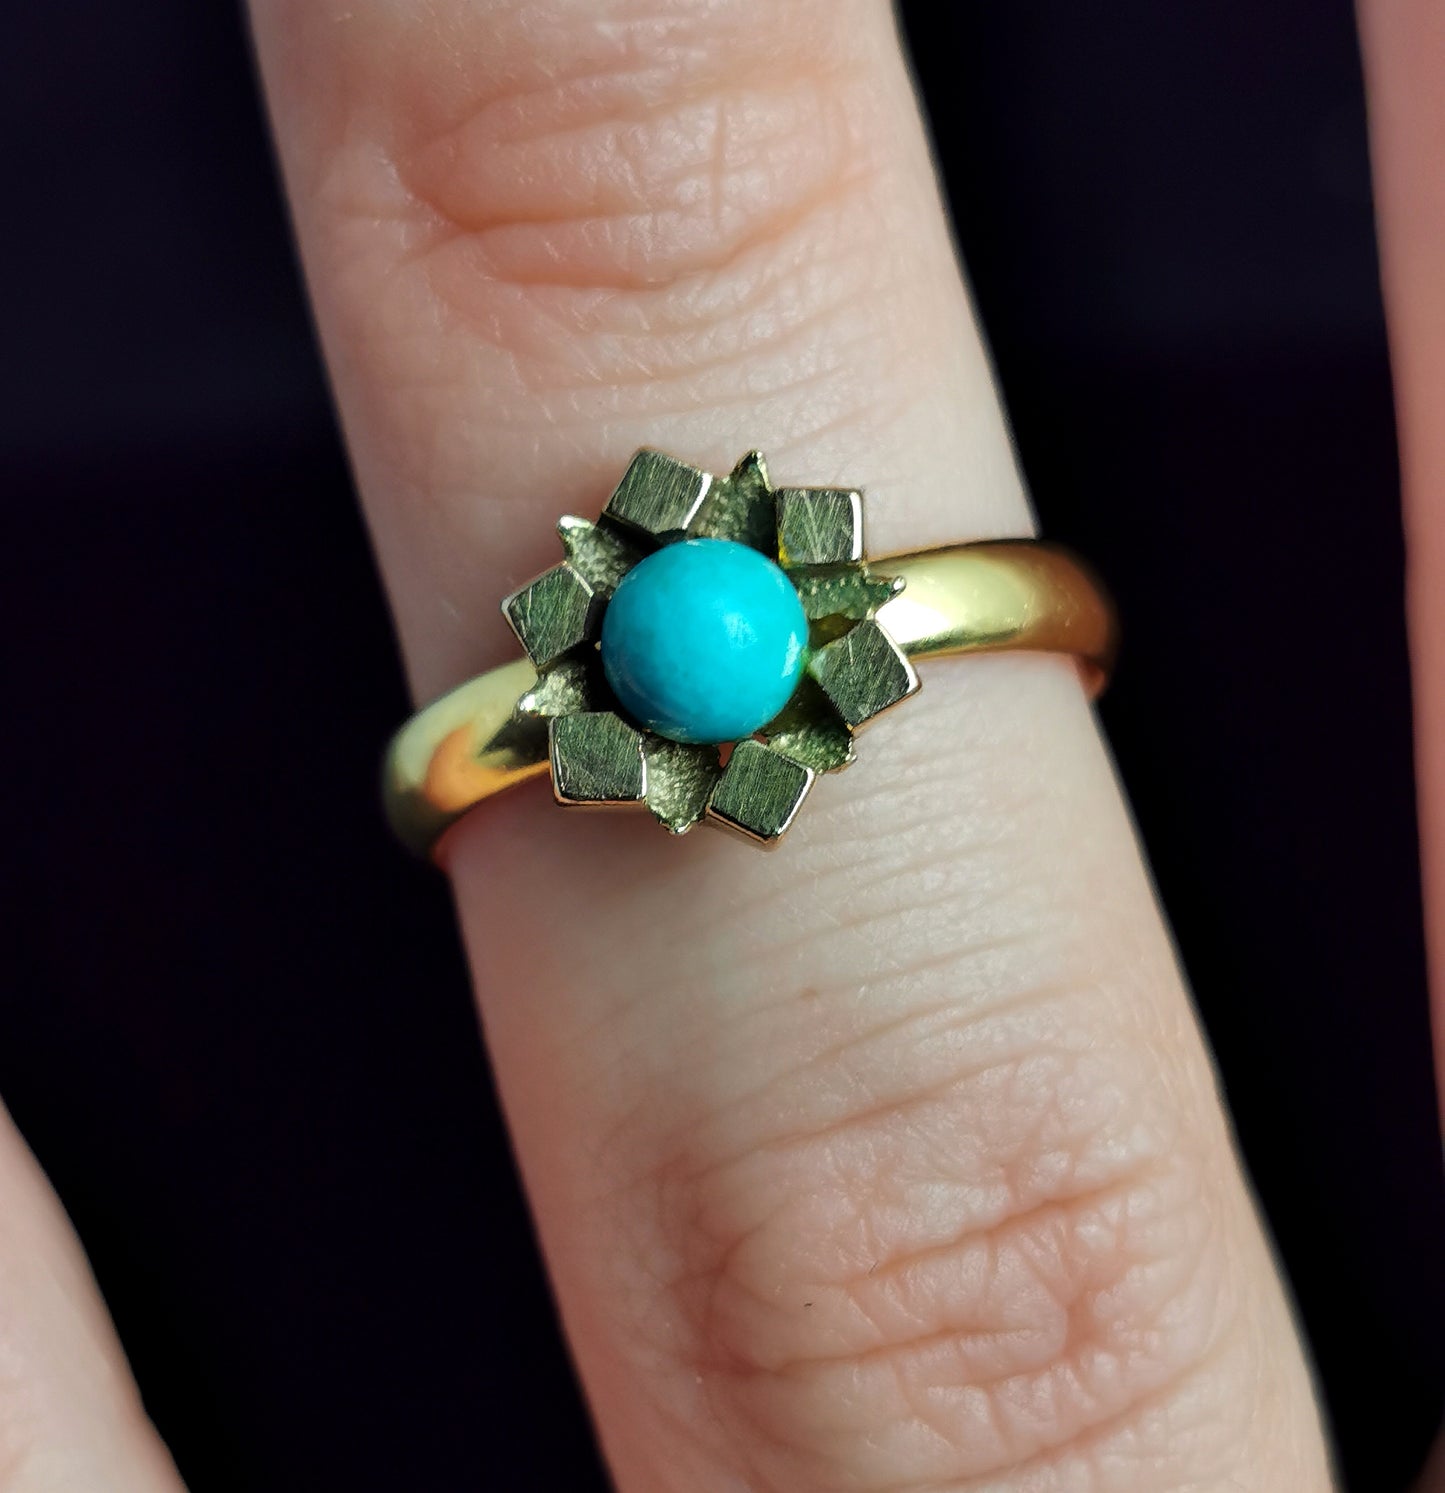 Antique Victorian 22ct gold band ring, Turquoise flower